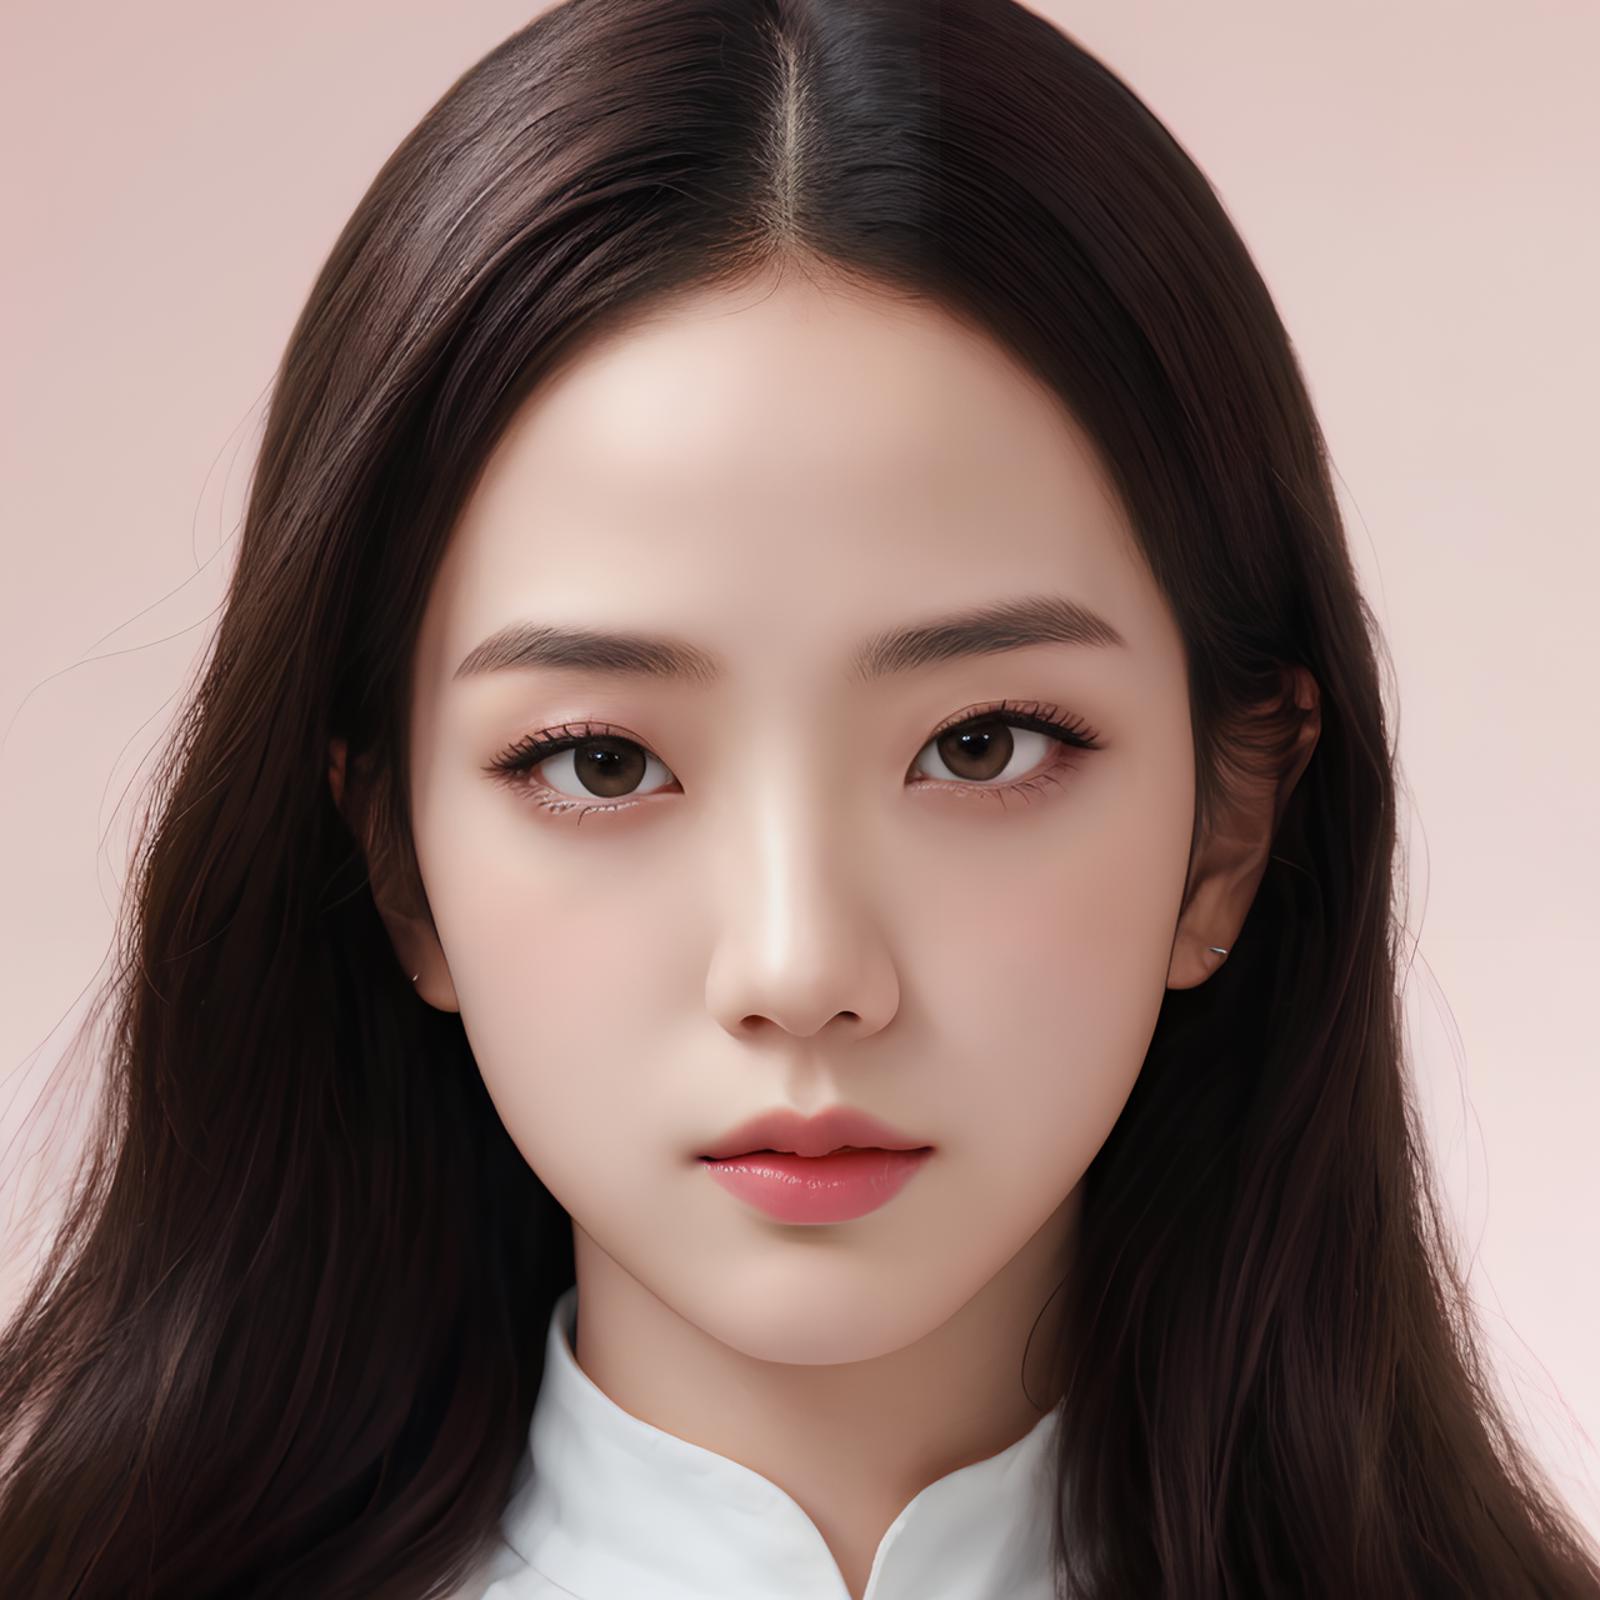 Not Blackpink - Jisoo image by Tissue_AI